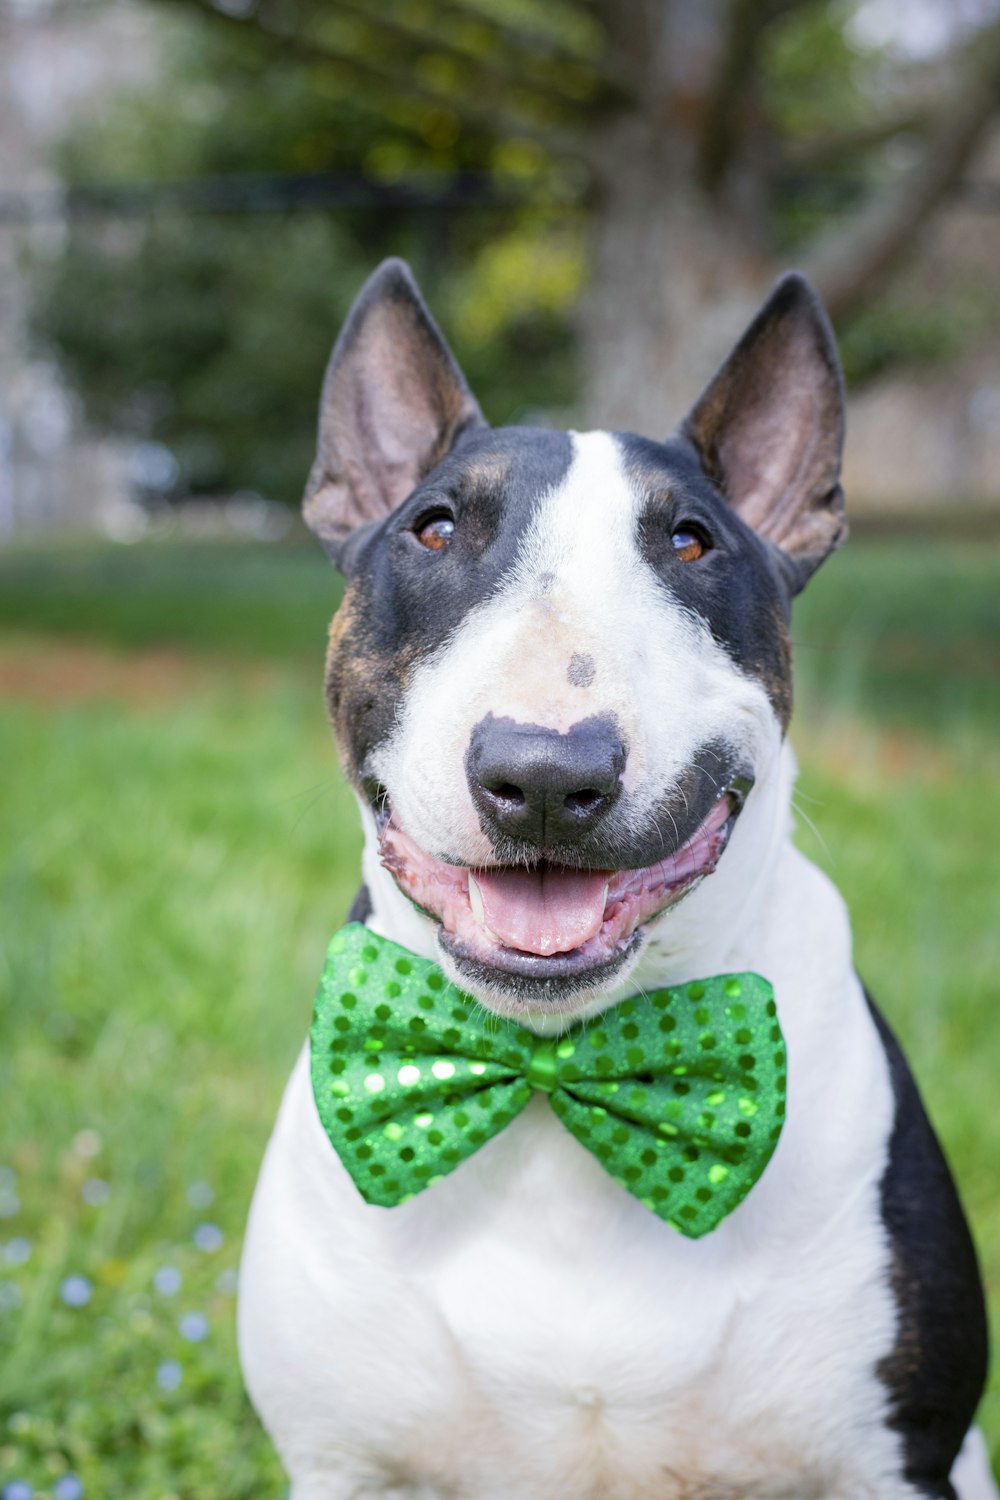 white and black short coated dog with red bowtie on green grass field during daytime